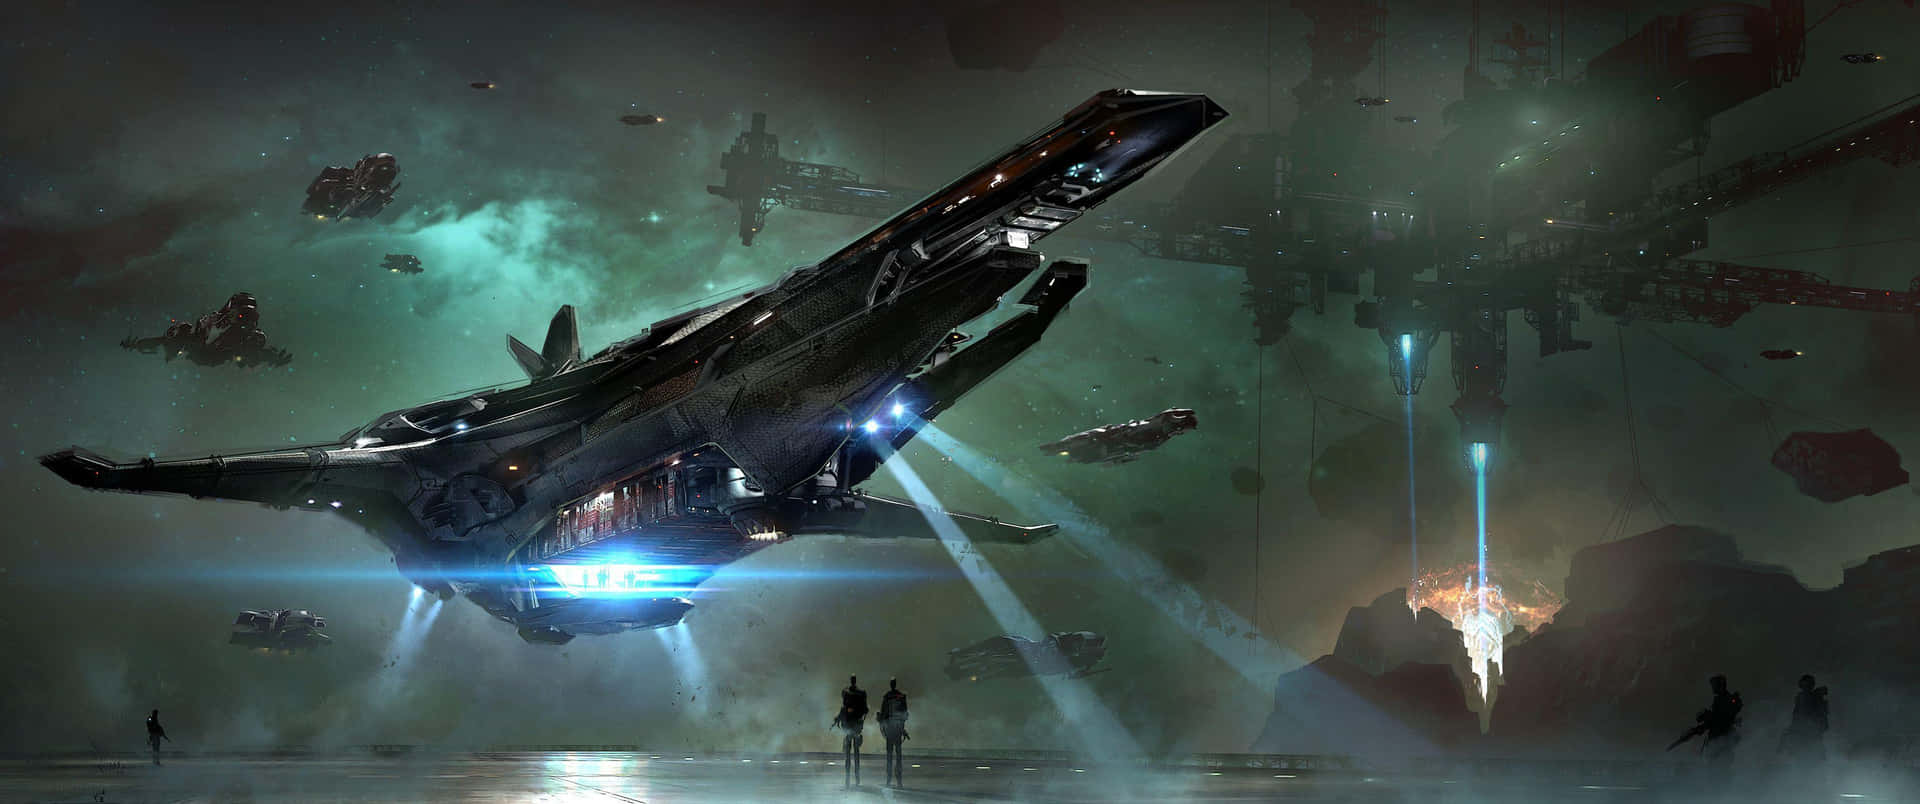 3440x1440p Social Background Space Aircraft